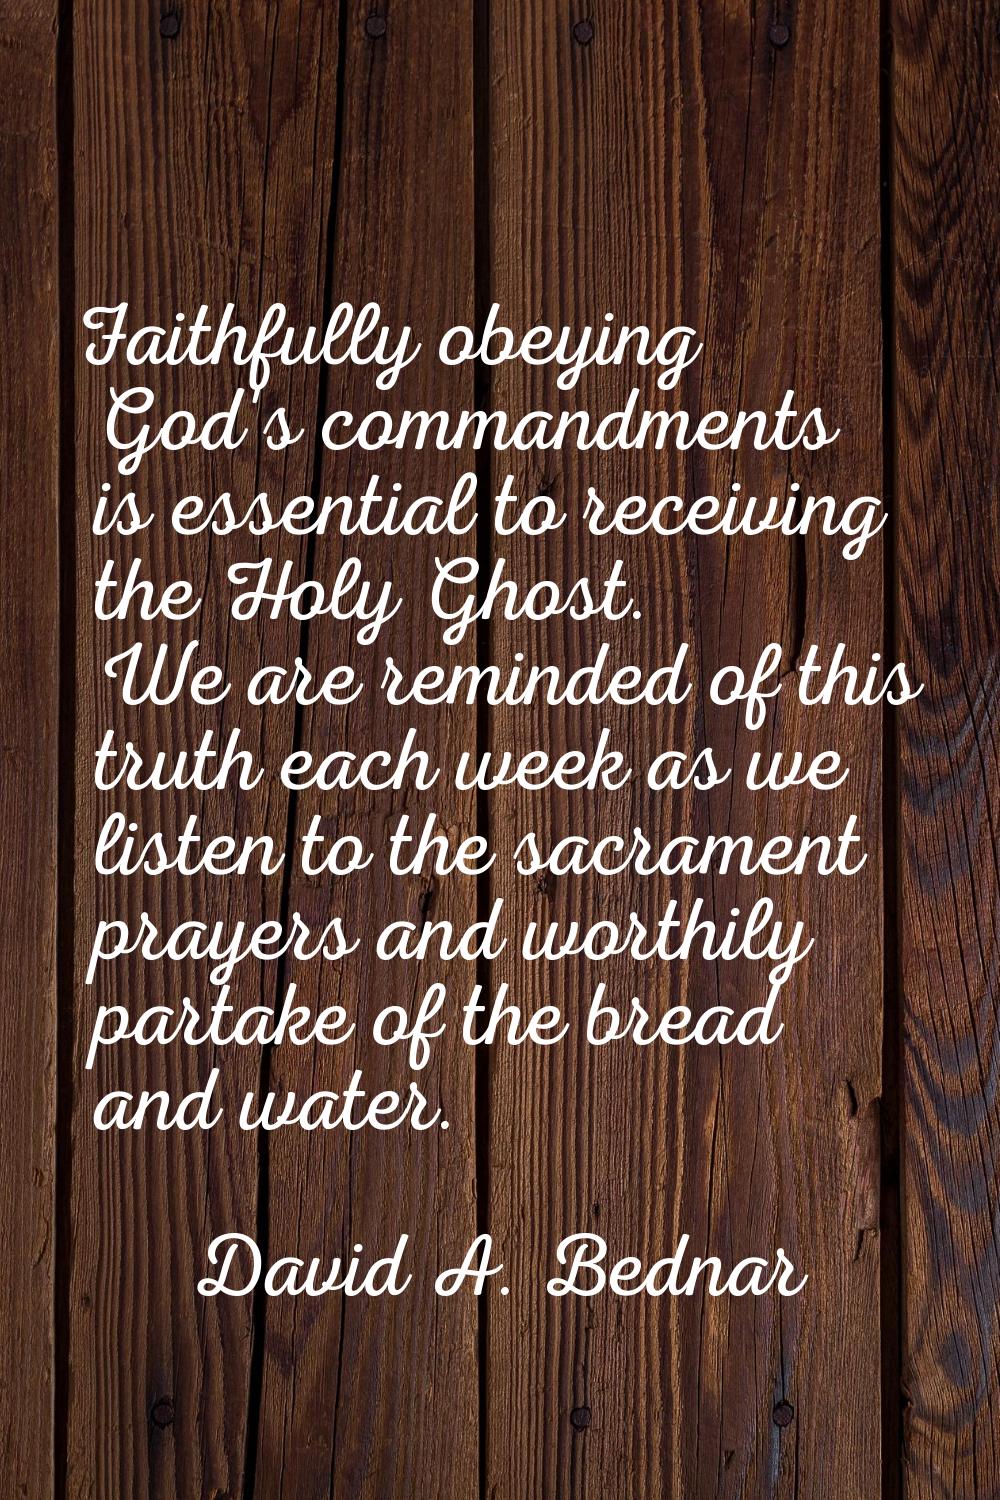 Faithfully obeying God's commandments is essential to receiving the Holy Ghost. We are reminded of 